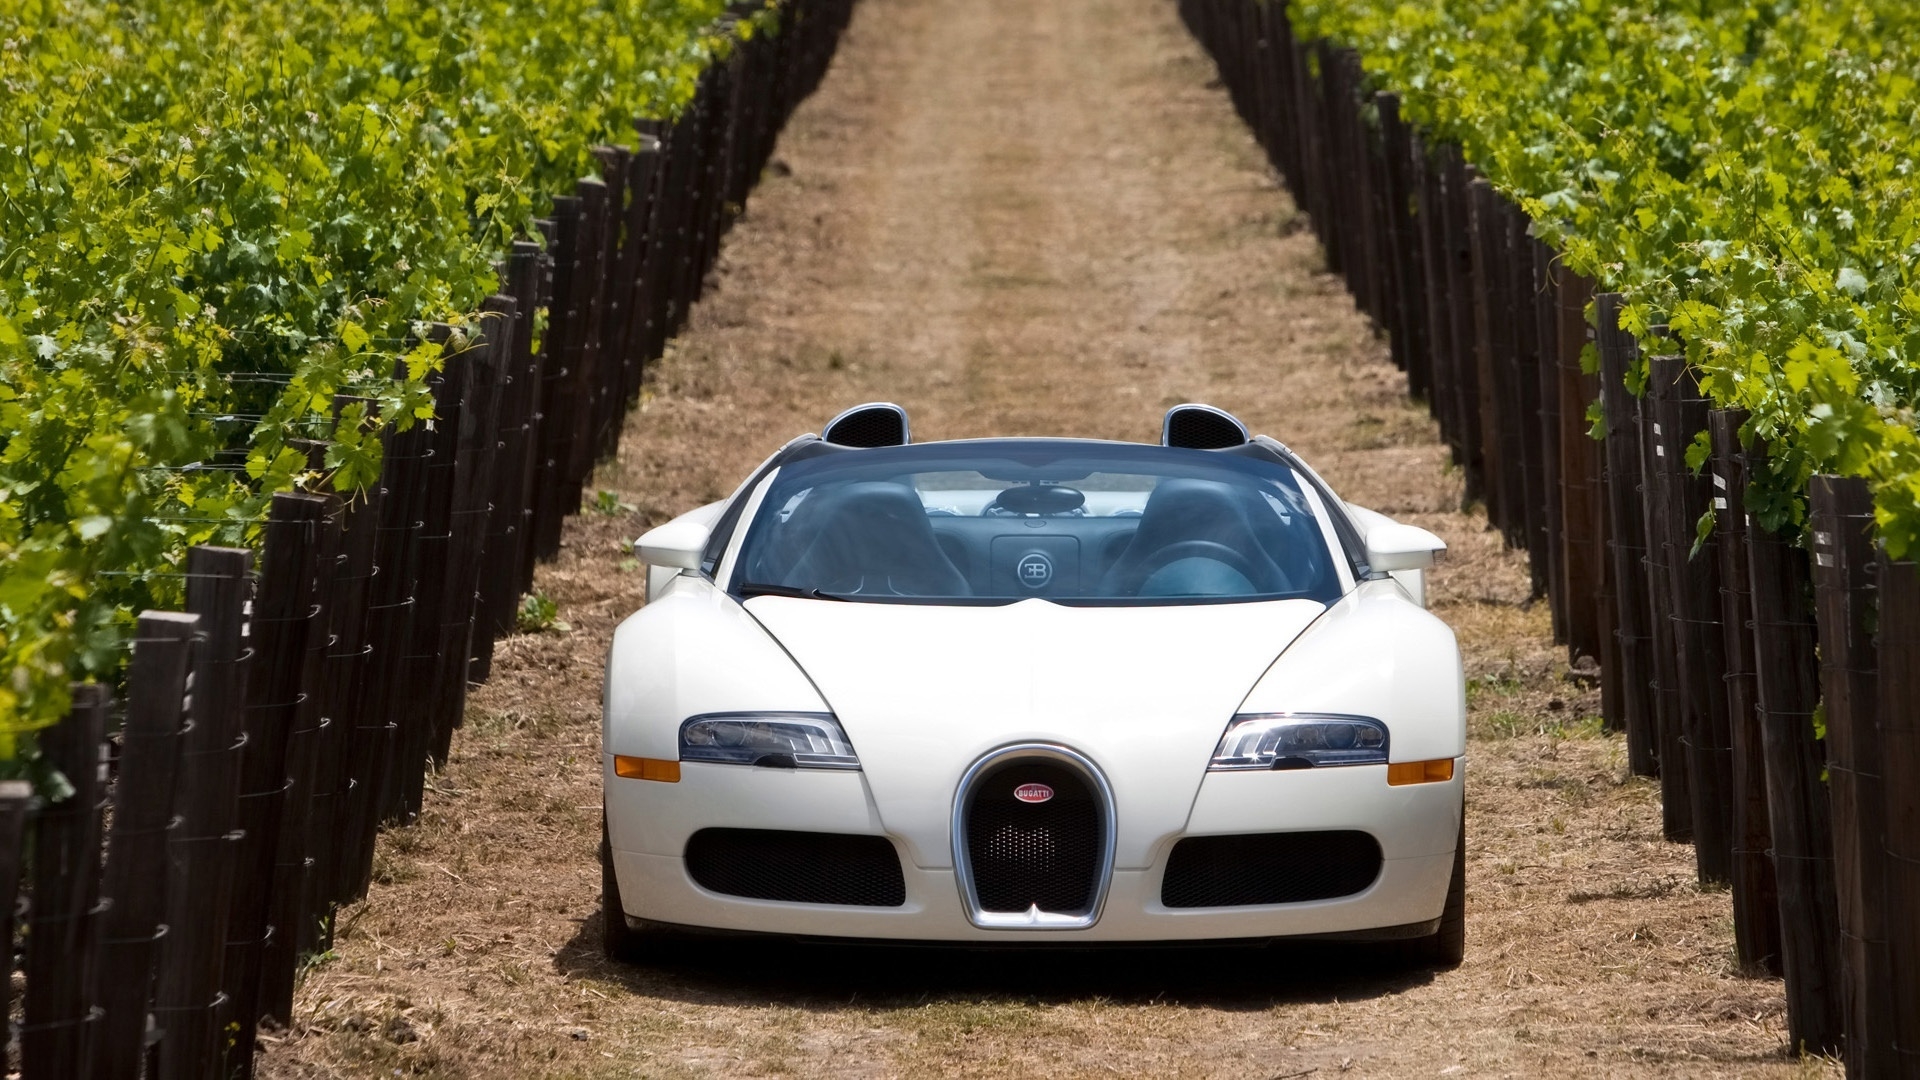 Bugatti Veyron 16.4 Grand Sport 2010 in Napa Valley - Front 3 for 1920 x 1080 HDTV 1080p resolution